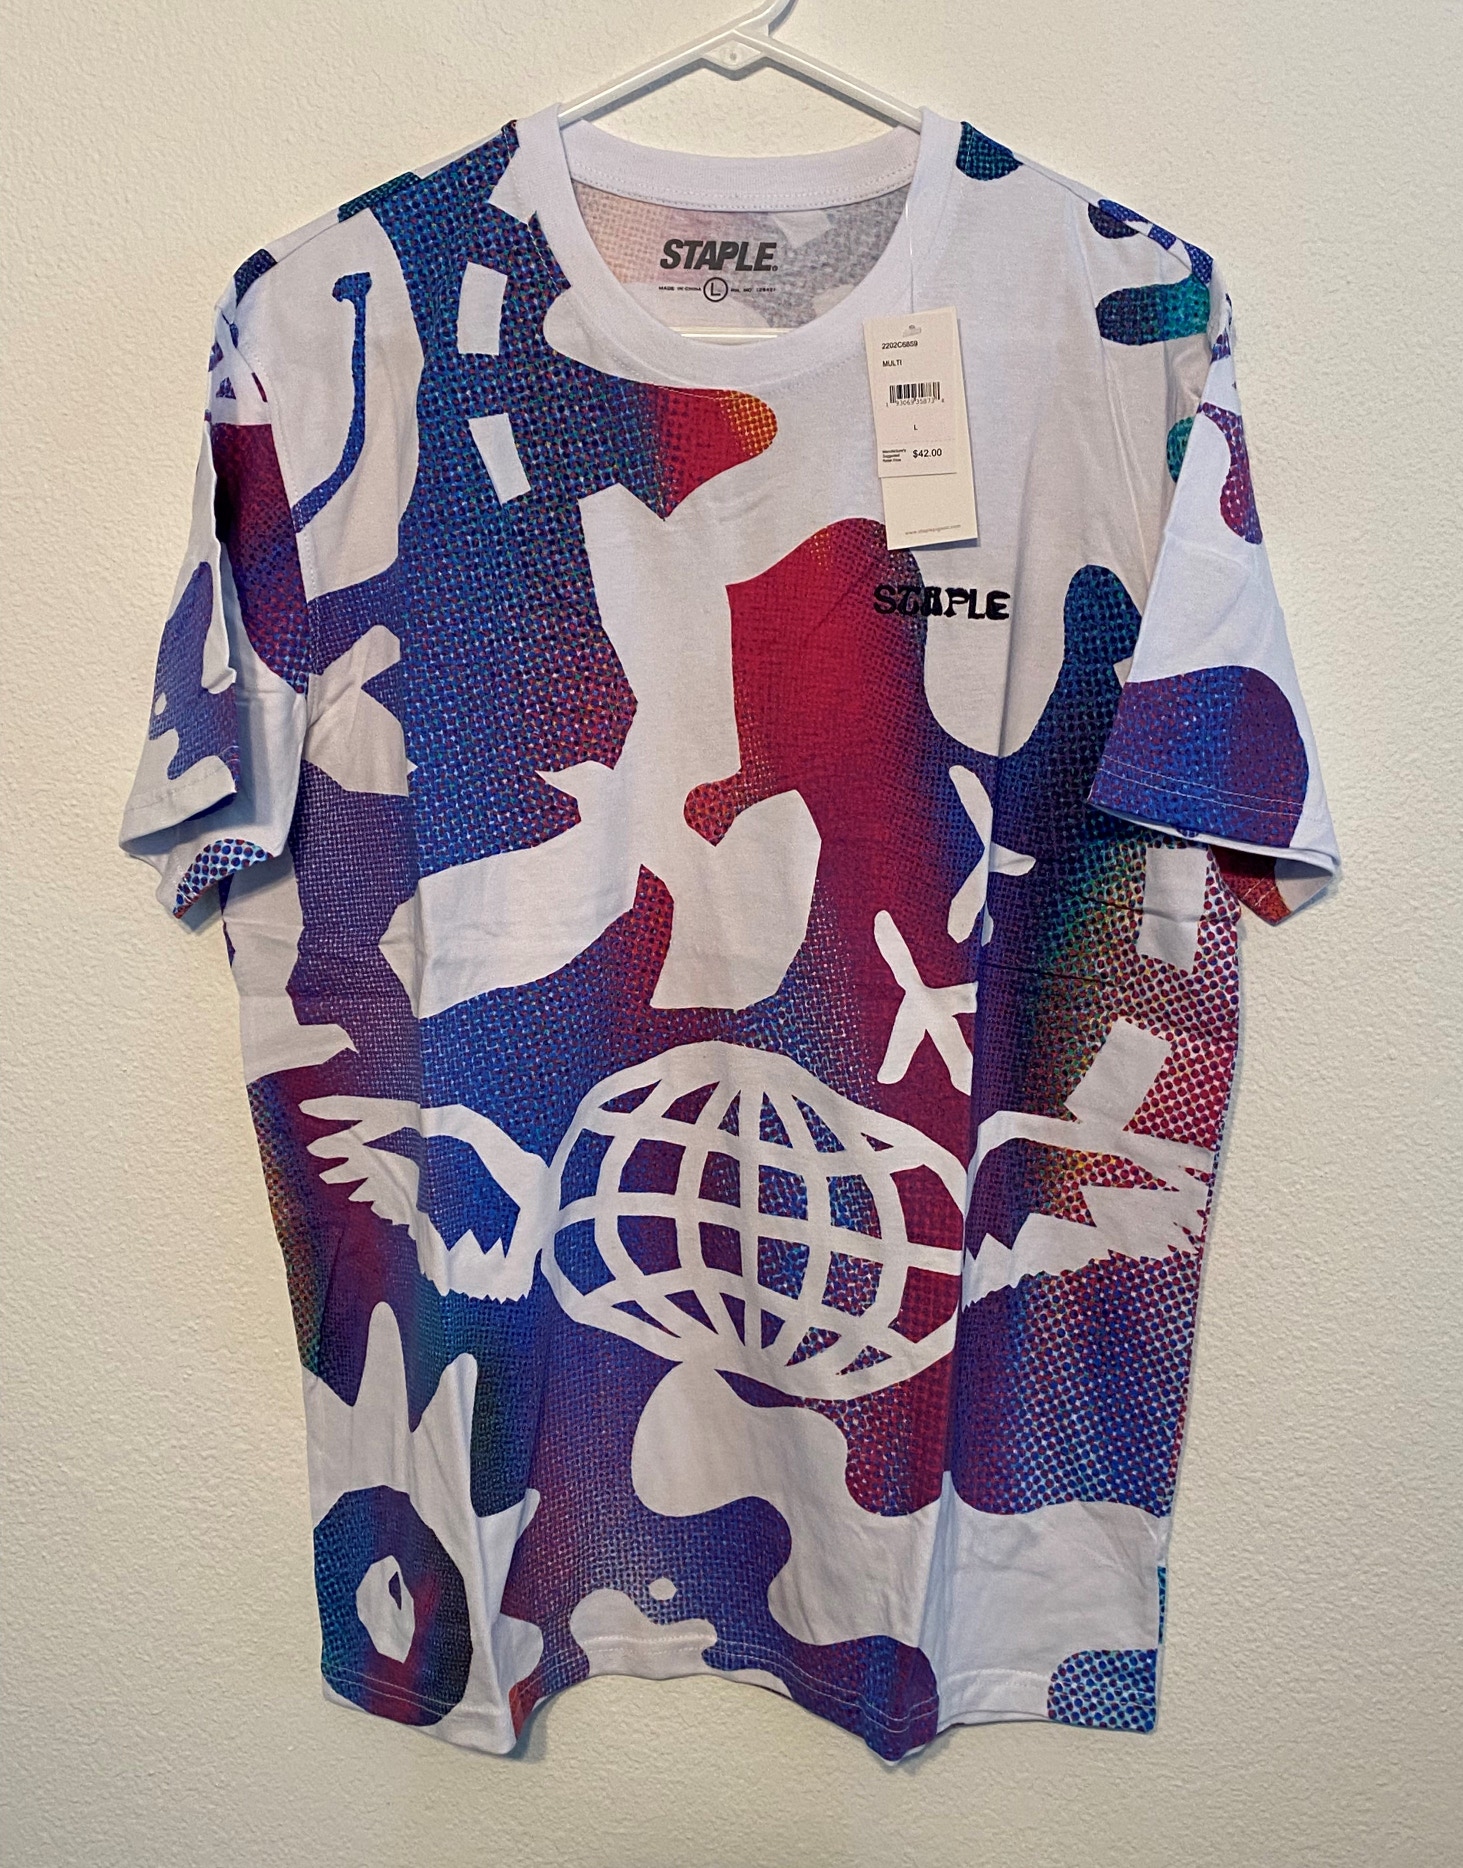 Staple Pigeon NYC All Over Print Size XL Multi Graphic Skateboarding T Shirt New